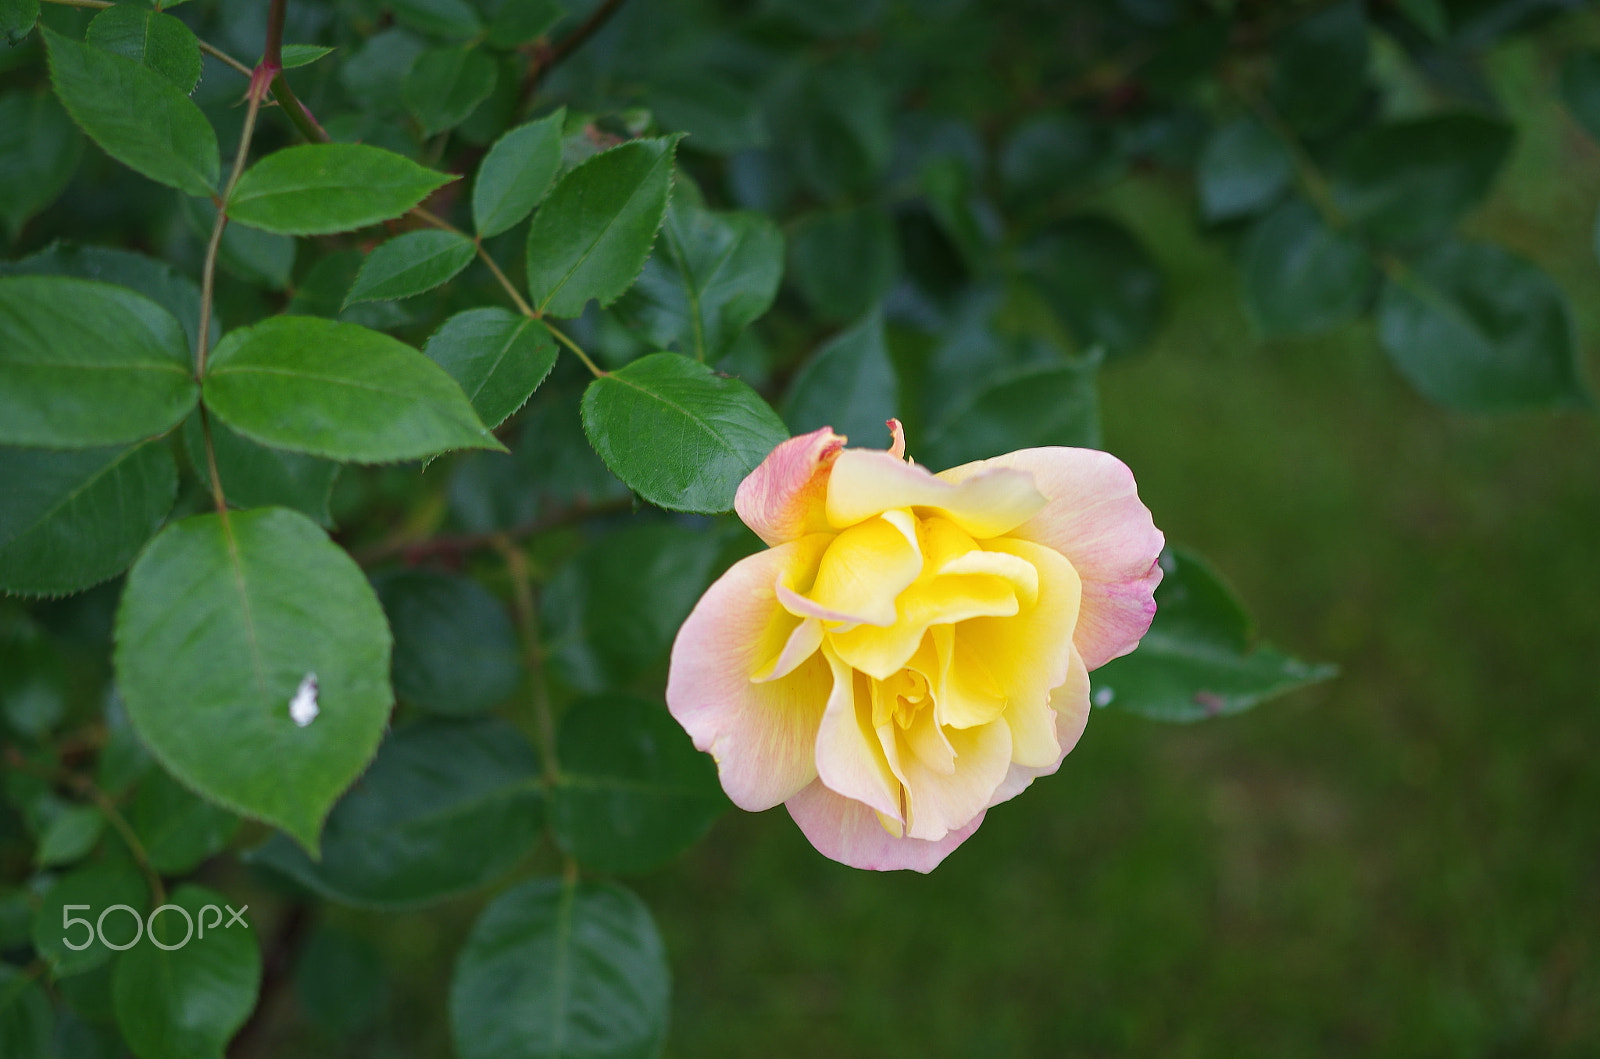 Pentax smc DA 35mm F2.4 AL sample photo. My first rose in this year photography